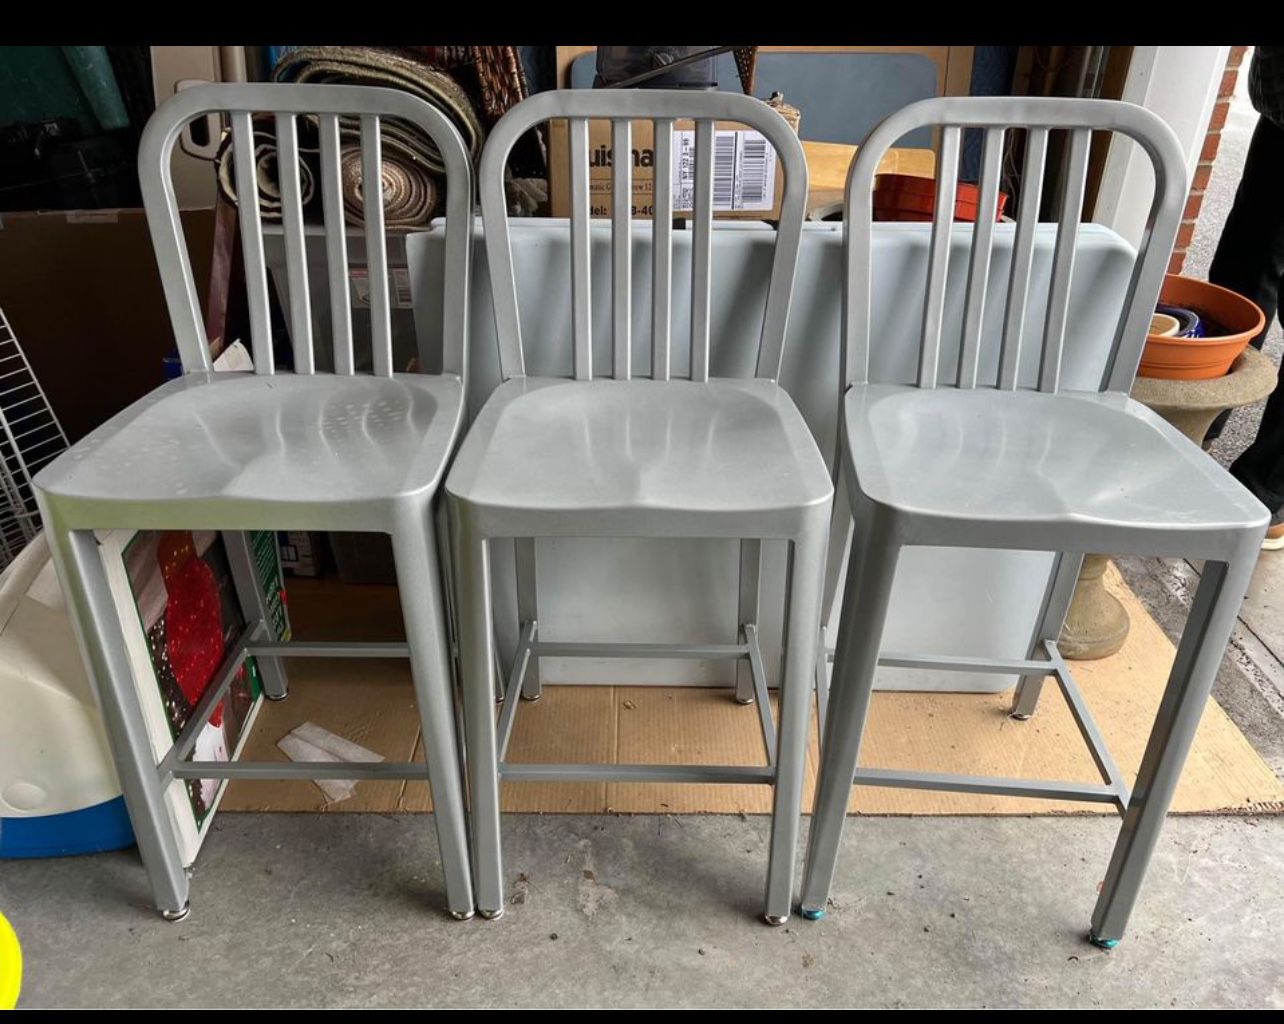 3 Counter Height Chairs